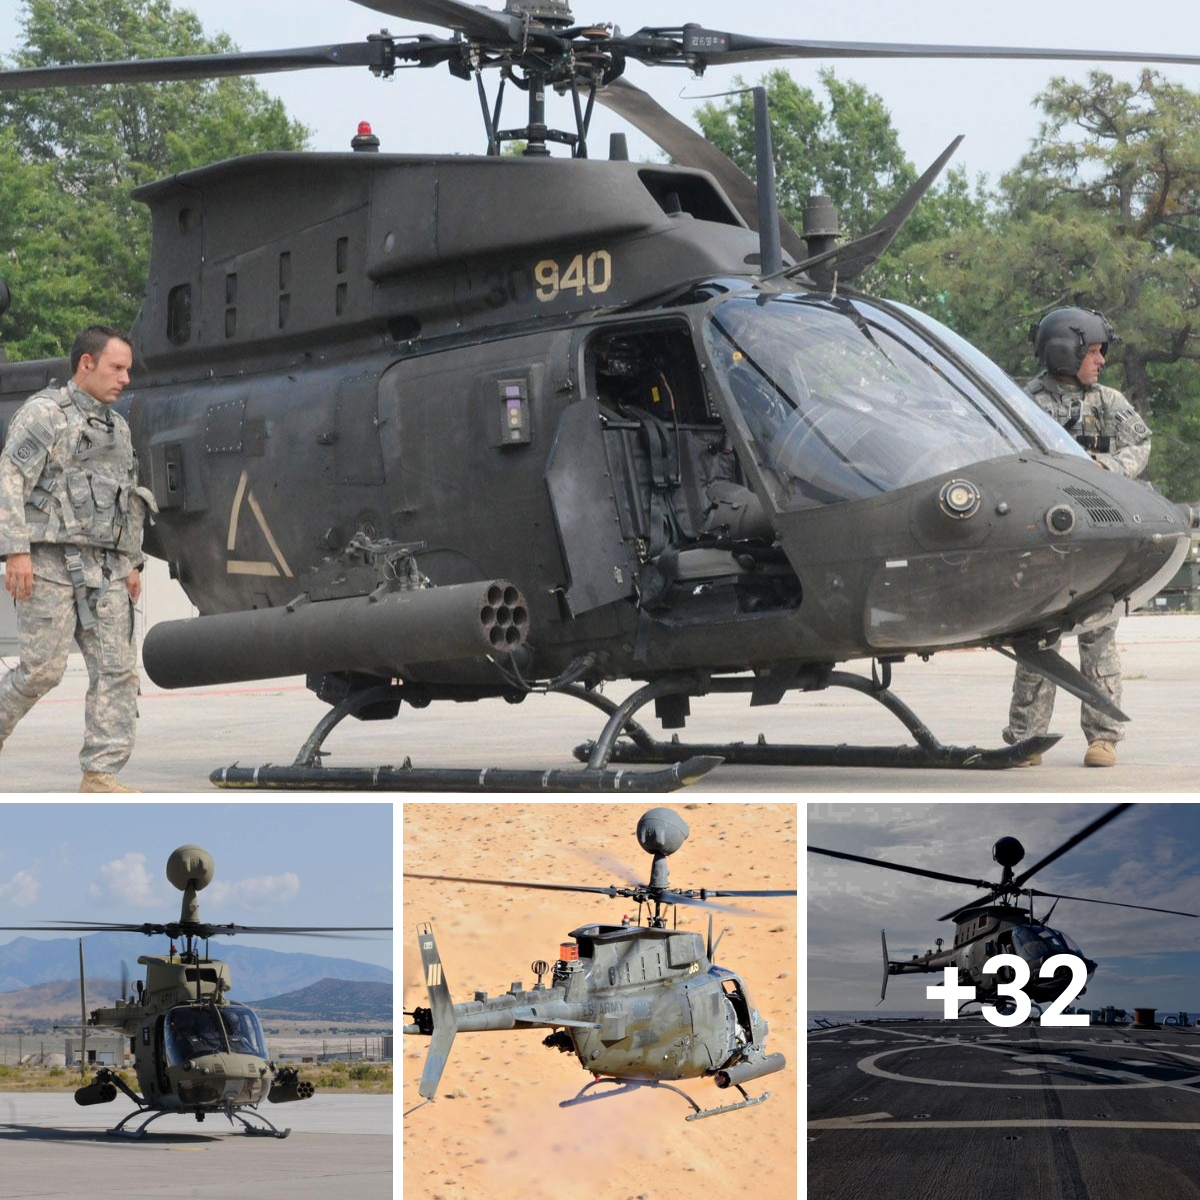 The versatile OH-58D Kiowa helicopter is designed for light observation missions.